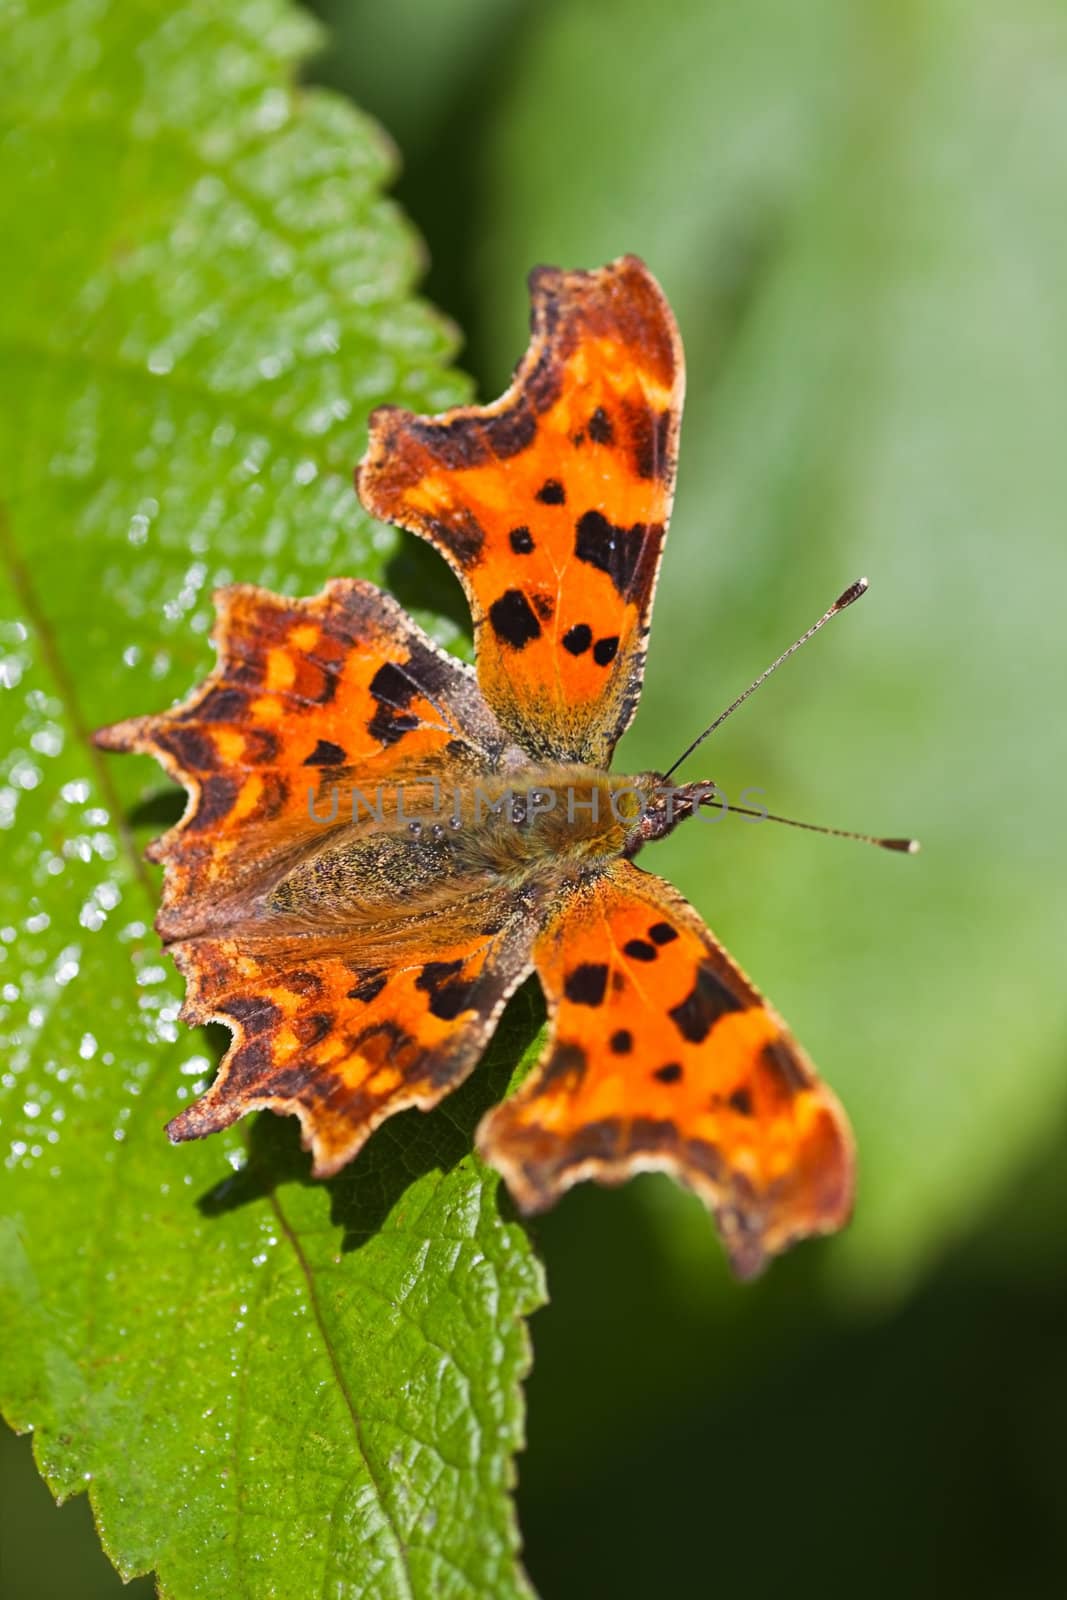 Comma butterfly in the sunshine resting on green leaf